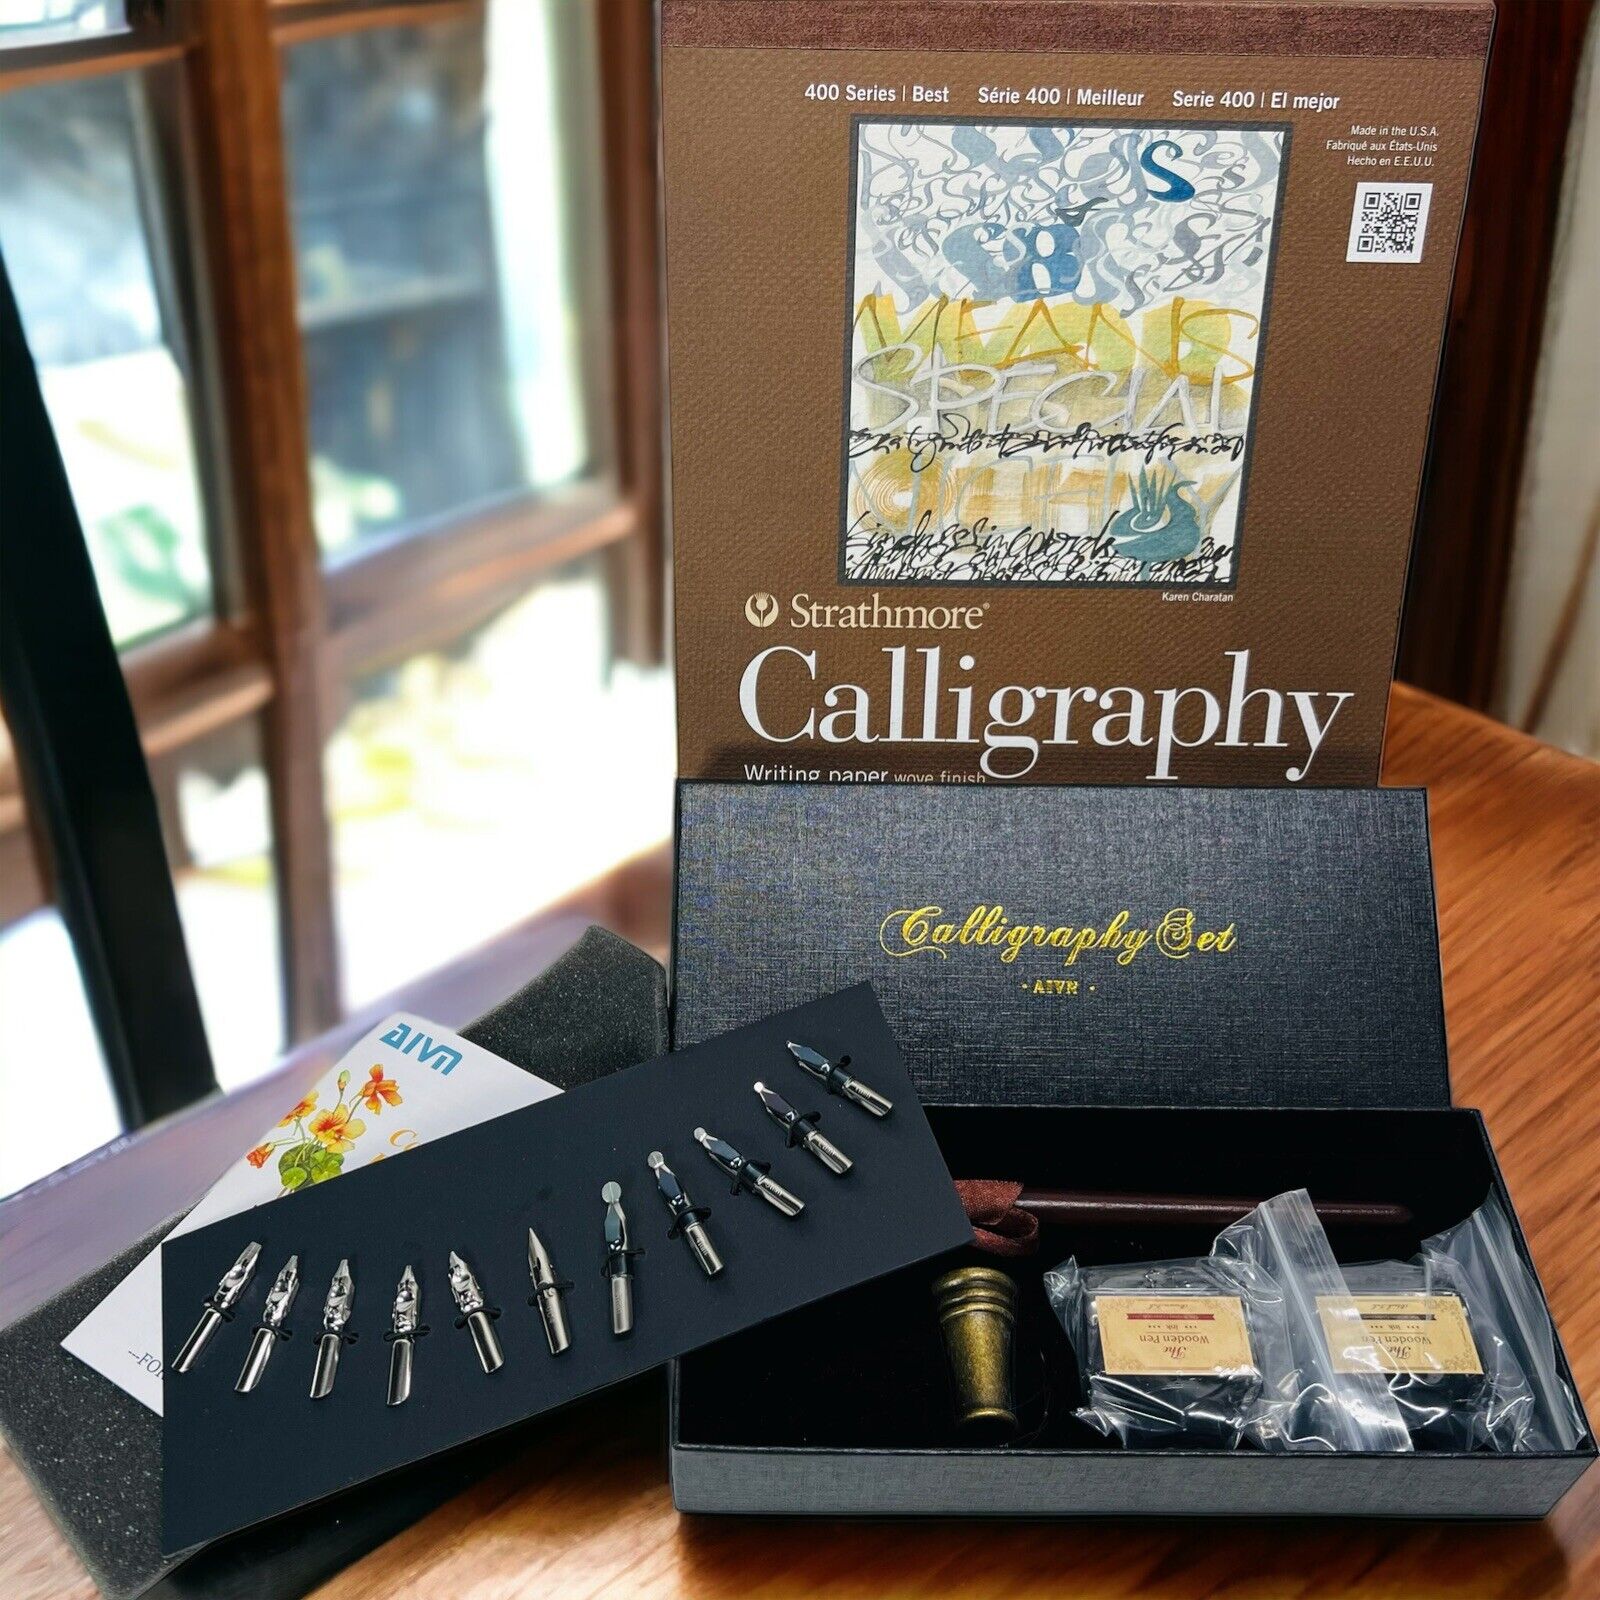 NEW AIVN The Writing Collection Calligraphy Set 15 Pieces Plus Strathmore Paper